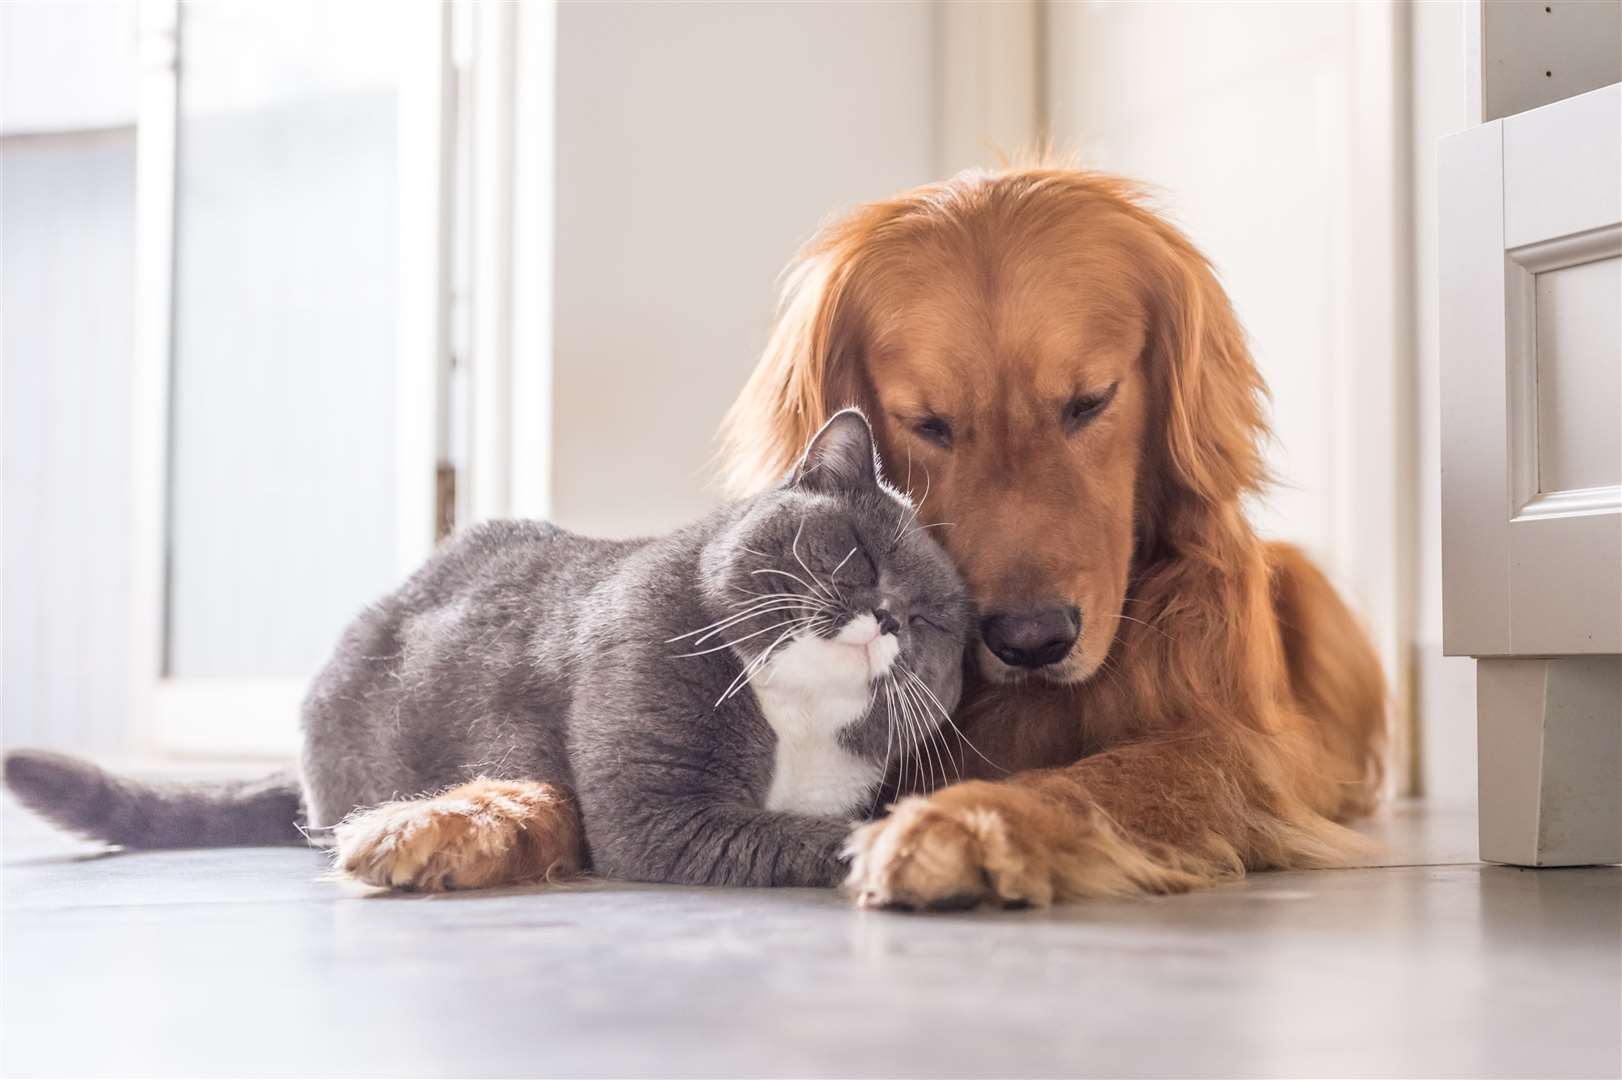 The new law brings dogs in line with cats. Image: Stock photo.